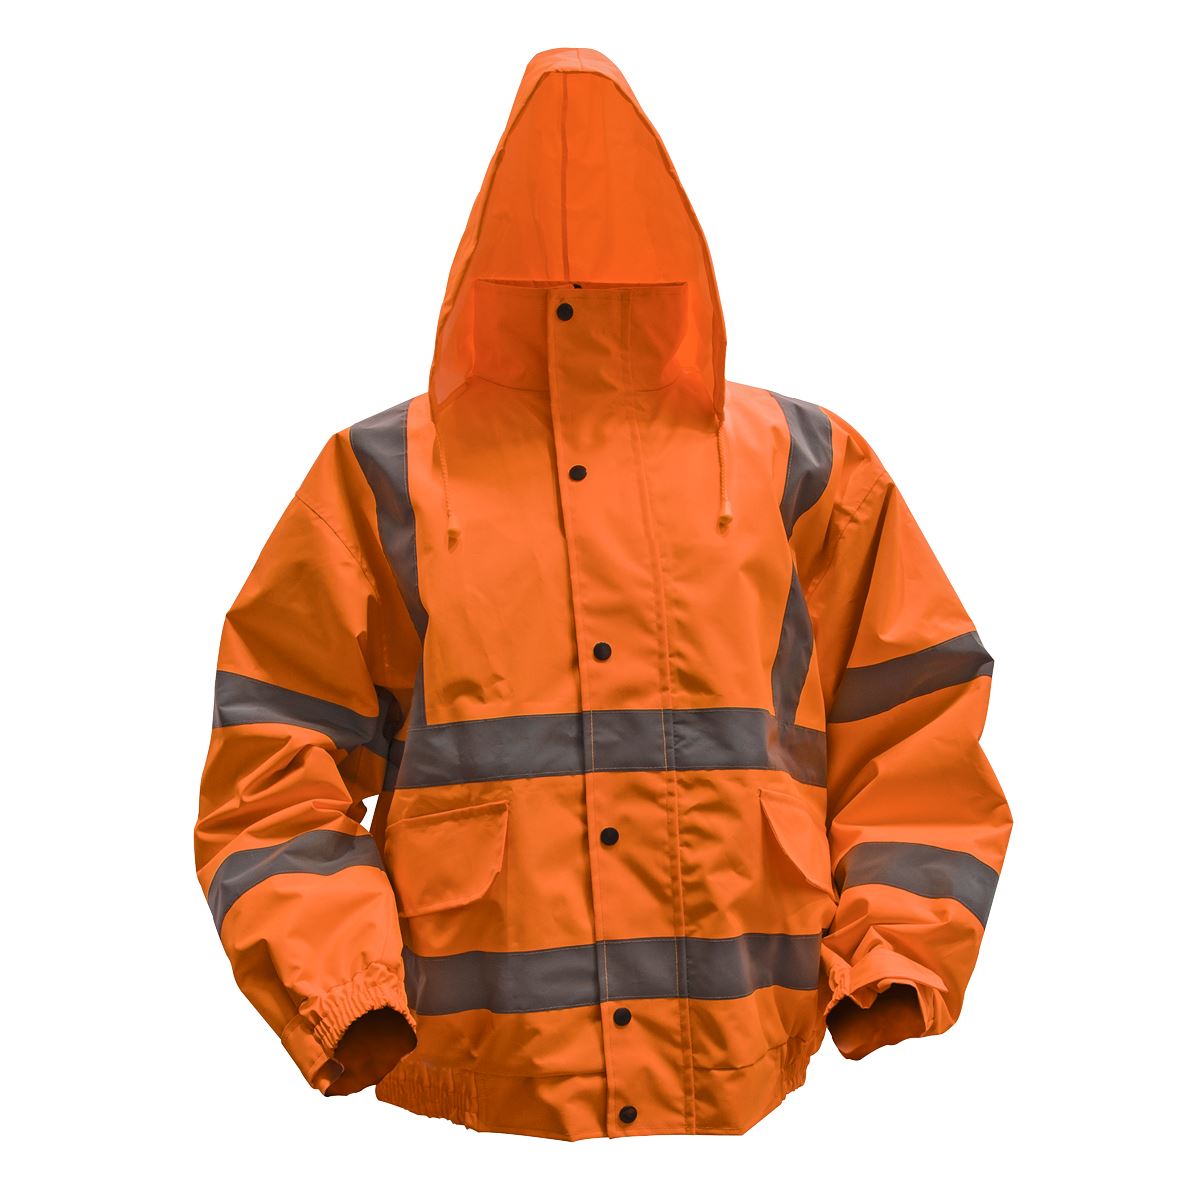 Worksafe by Sealey Hi-Vis Orange Jacket with Quilted Lining & Elasticated Waist - X-Large